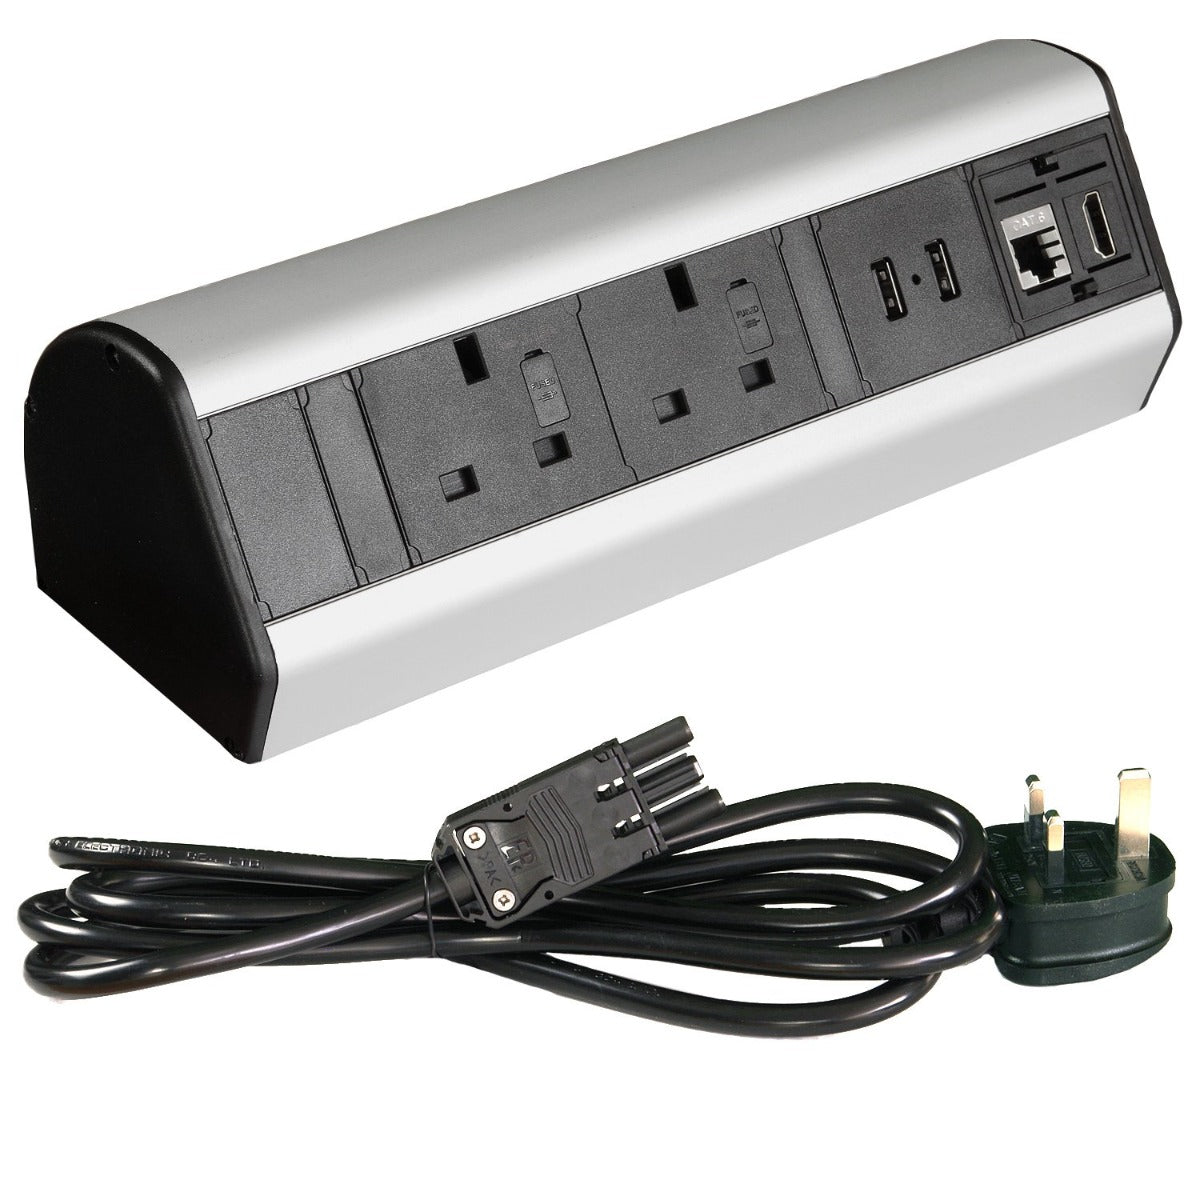 Desktop Power Extension with Clamp - 2 UK Sockets - 2 USB - 1 HDMI - 1 Ethernet - OOF-DP14S UK